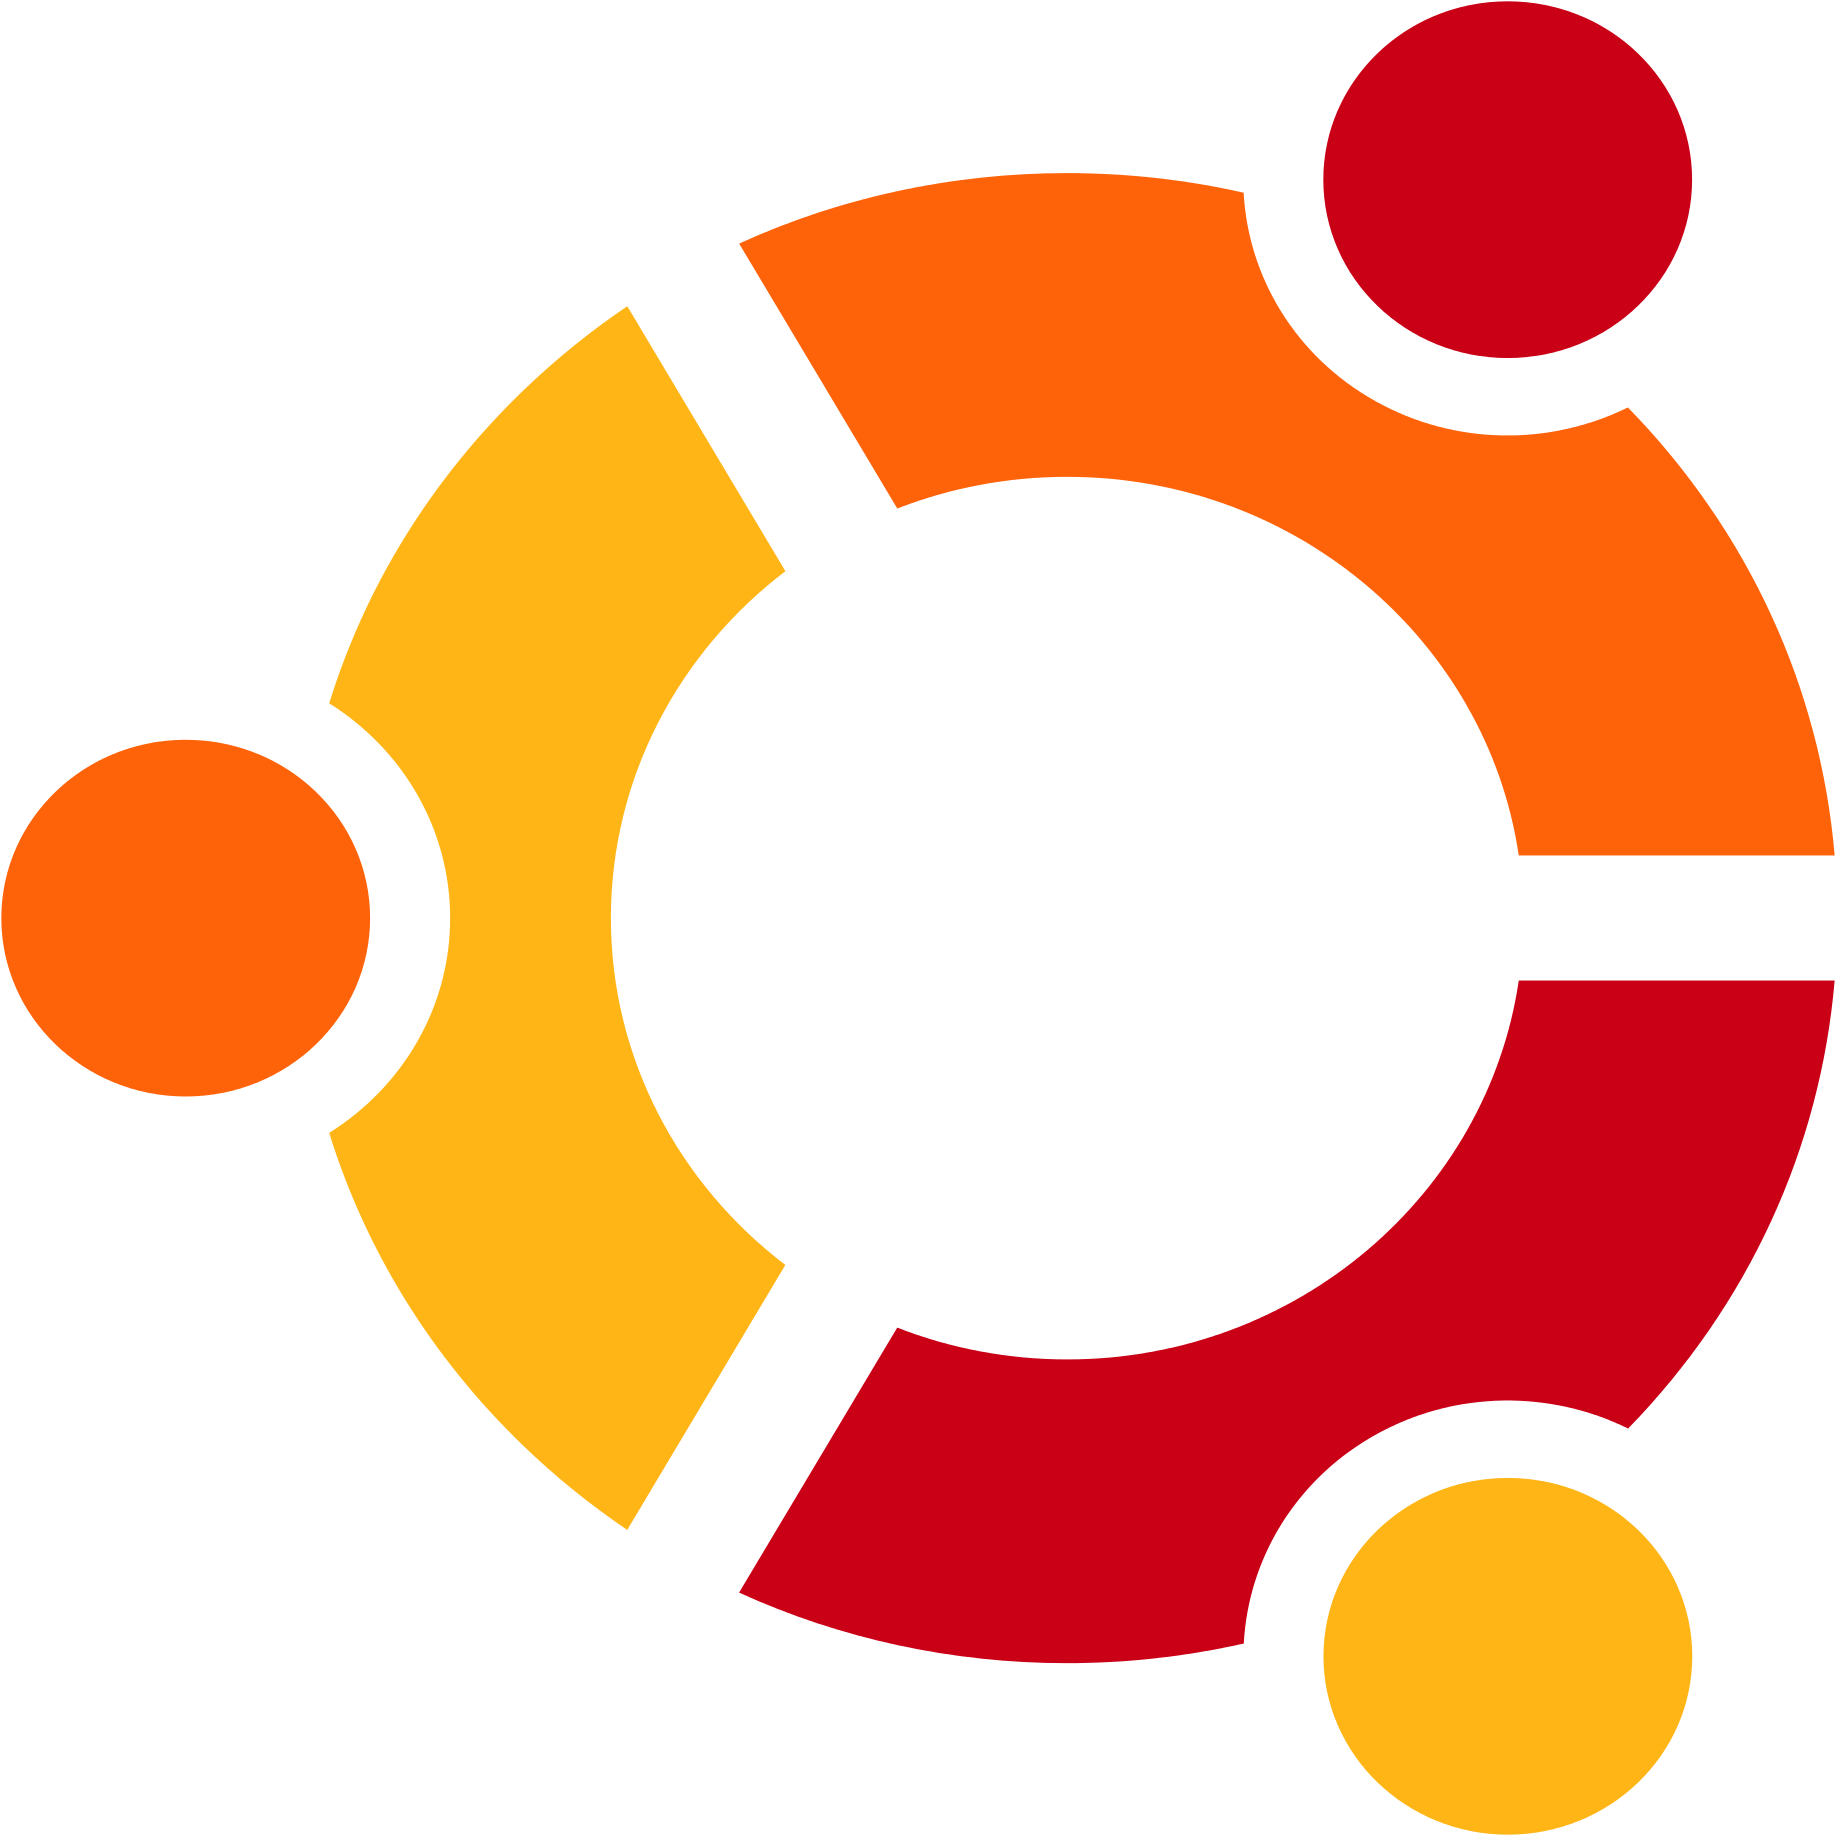 Computer Operating System Logo (2000x2000)